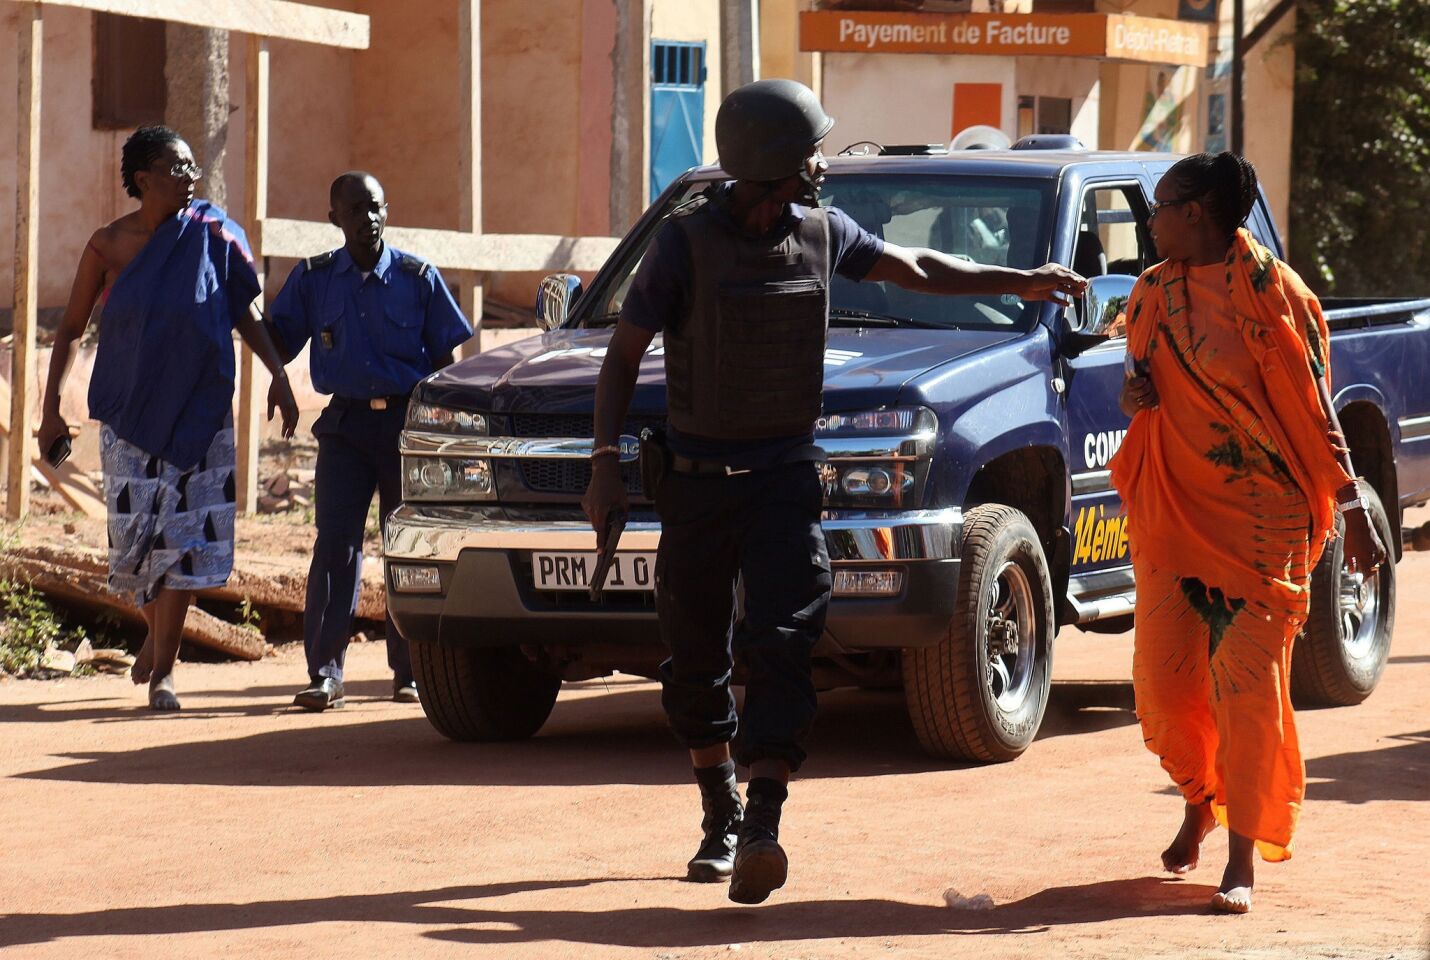 Malian security forces evacuate two women from an area surrounding the Radisson Blu hotel.